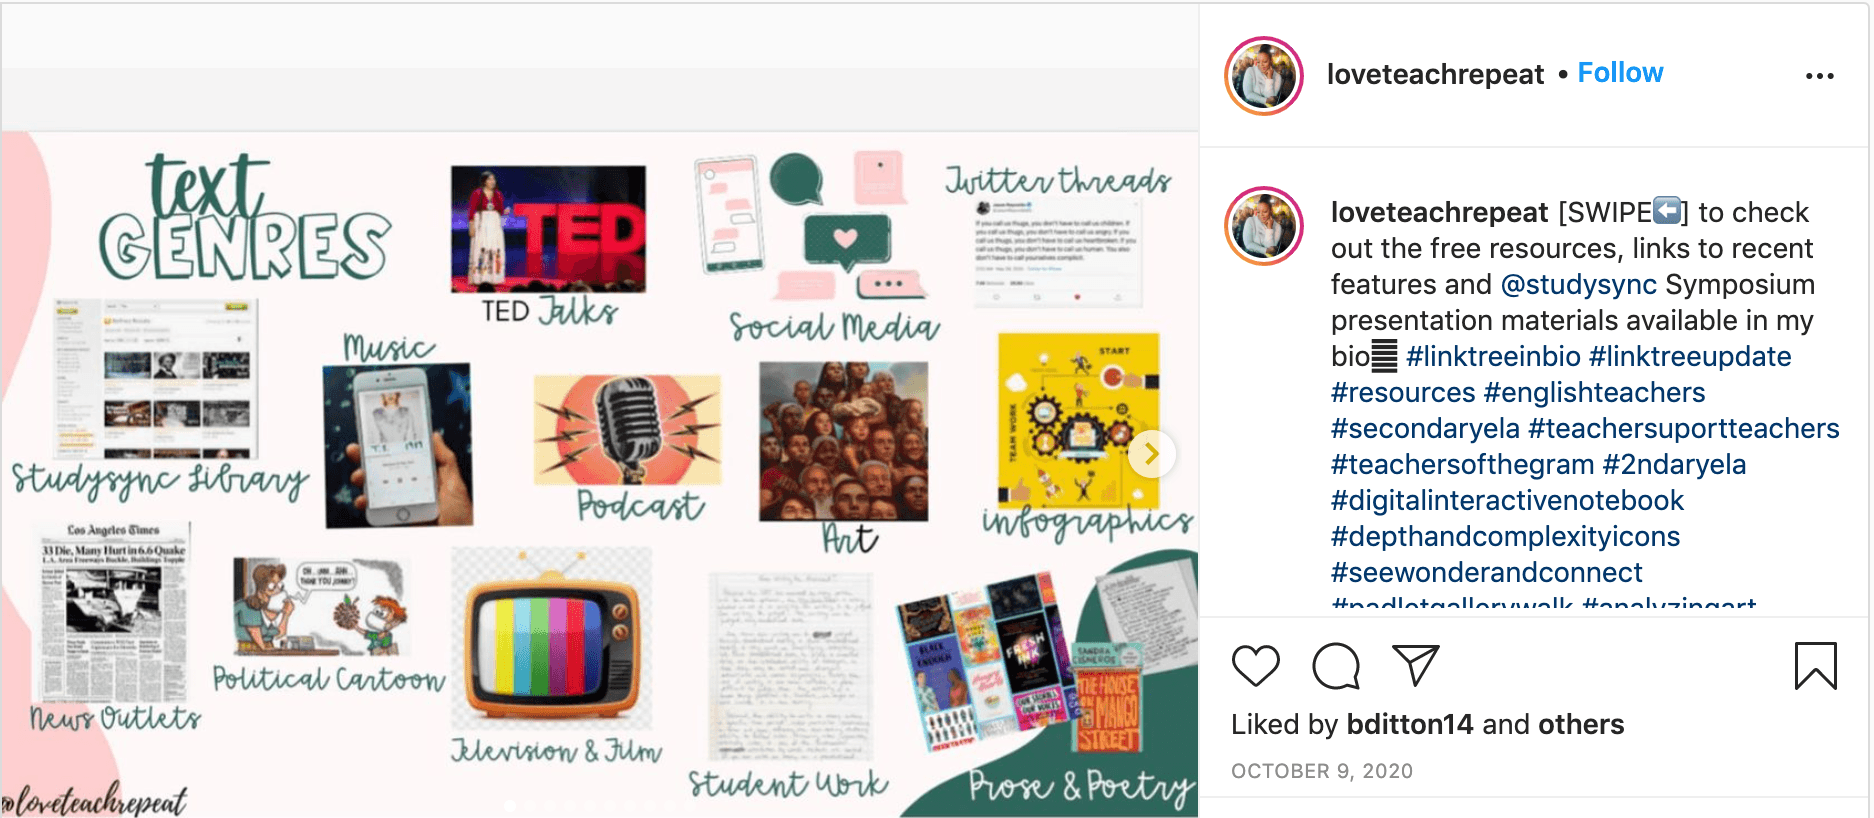 An Instagram post from Vennieta Grant, showing different text genres, such as political cartoons, podcasts, music and TED talks. The caption says, "Swipe to check out the free resources, links to recent features and StudySync Symposium presentation materials available in my bio."